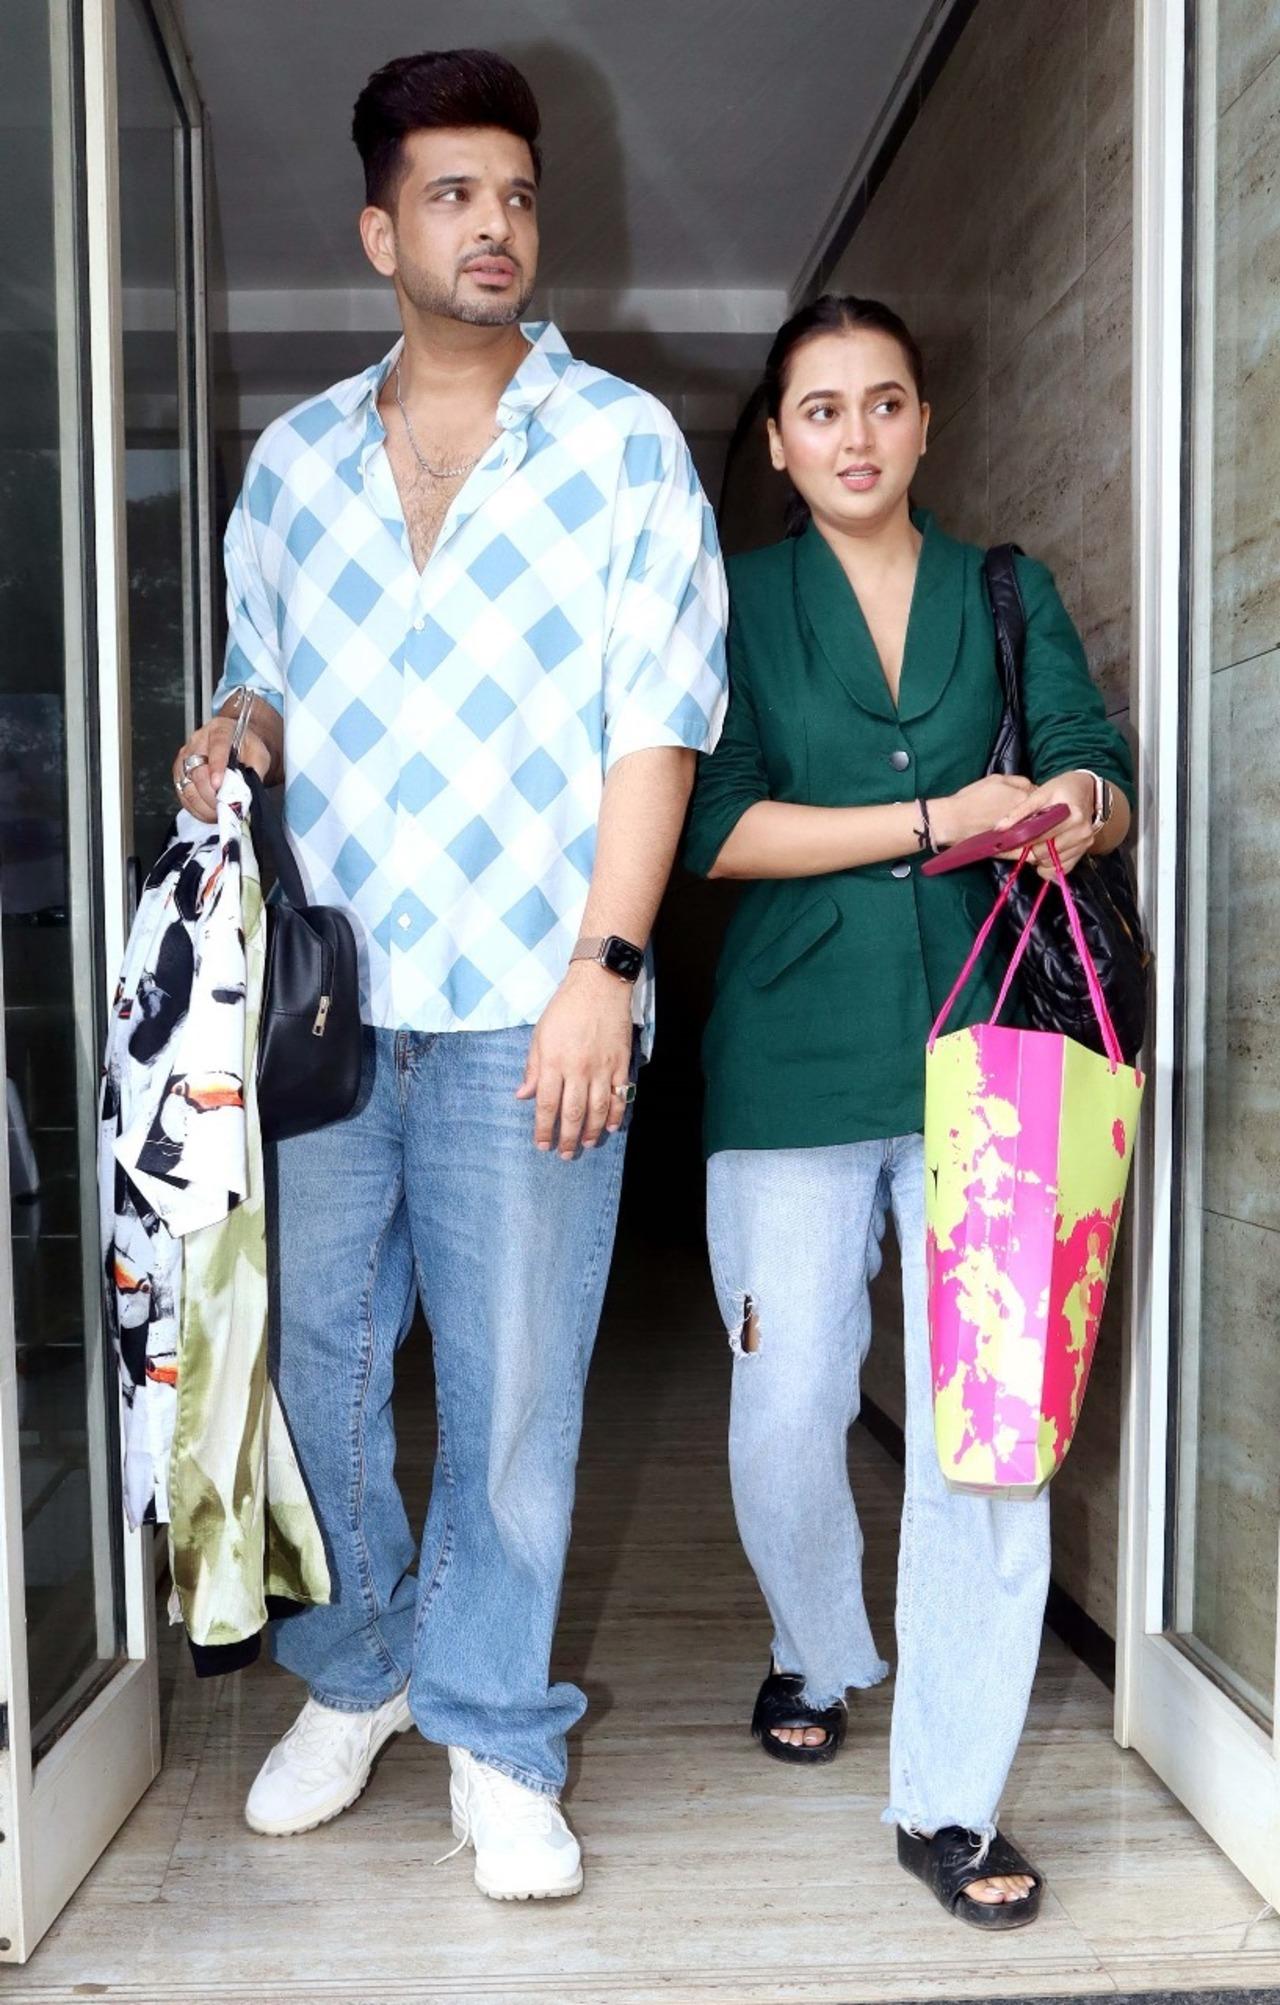 Tejasswi was later spotted with beau Karan Kundrra